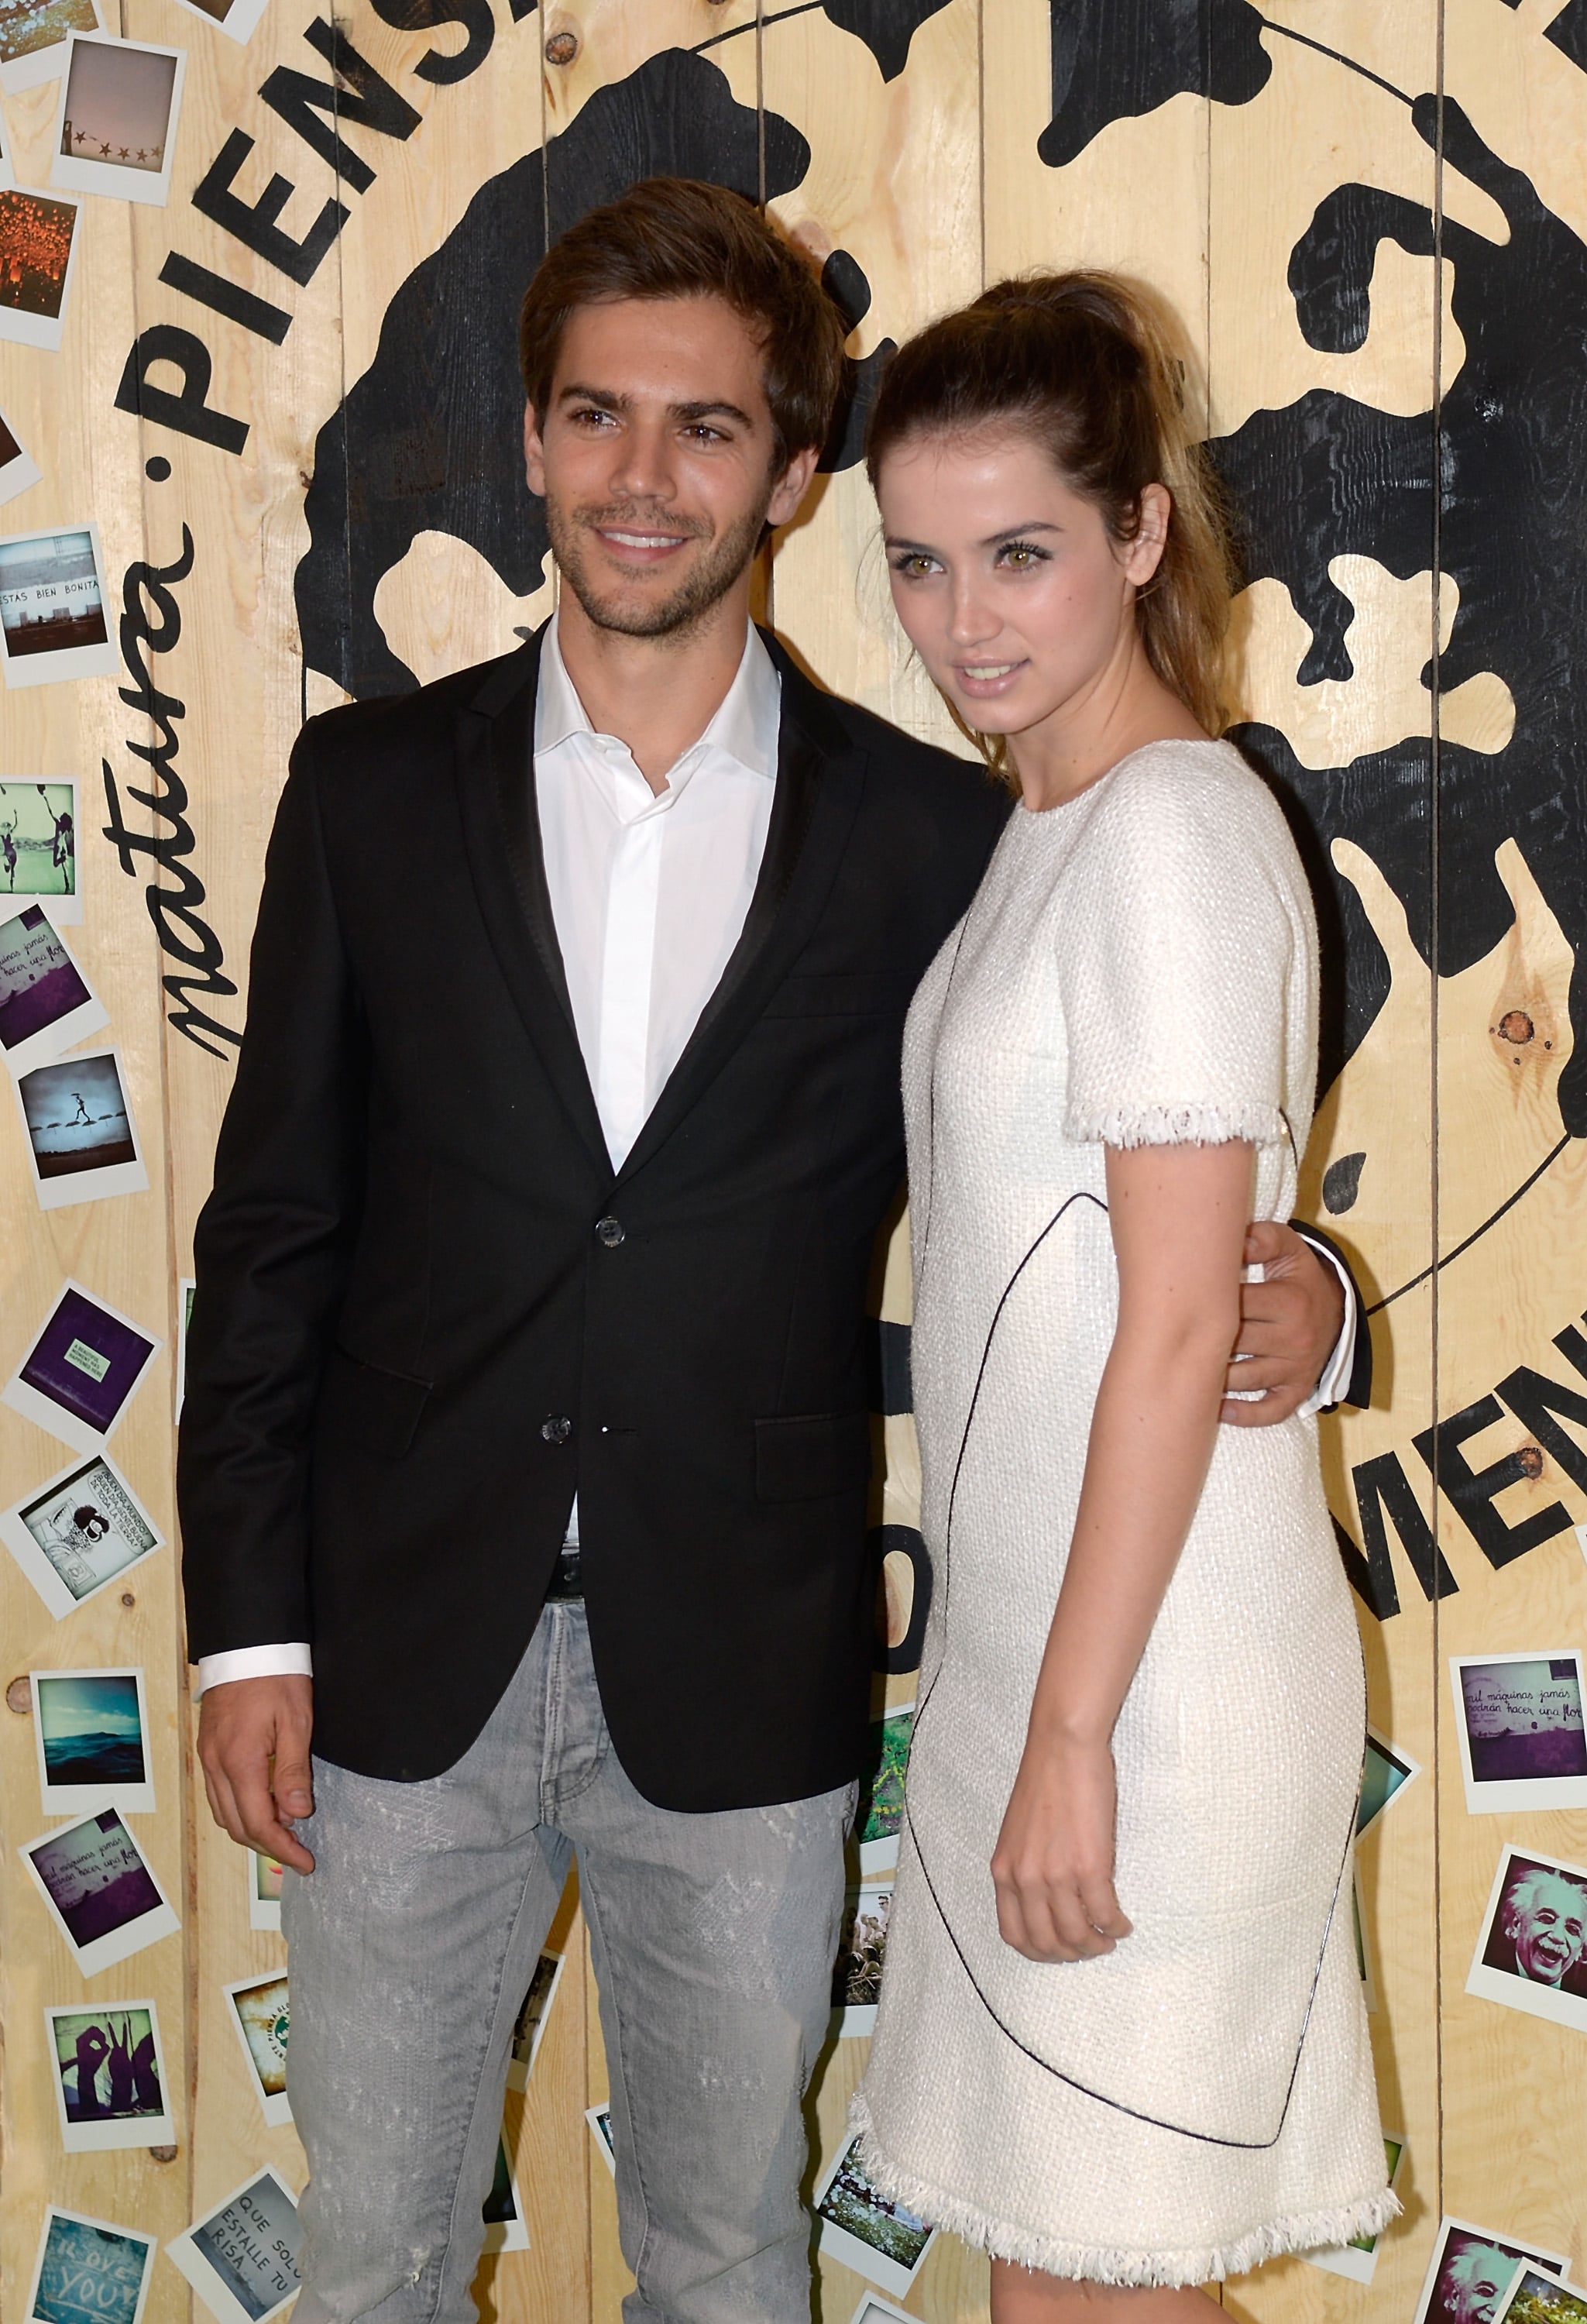 Who is Ana de Armas dating? All we know about the Blonde star's boyfriend